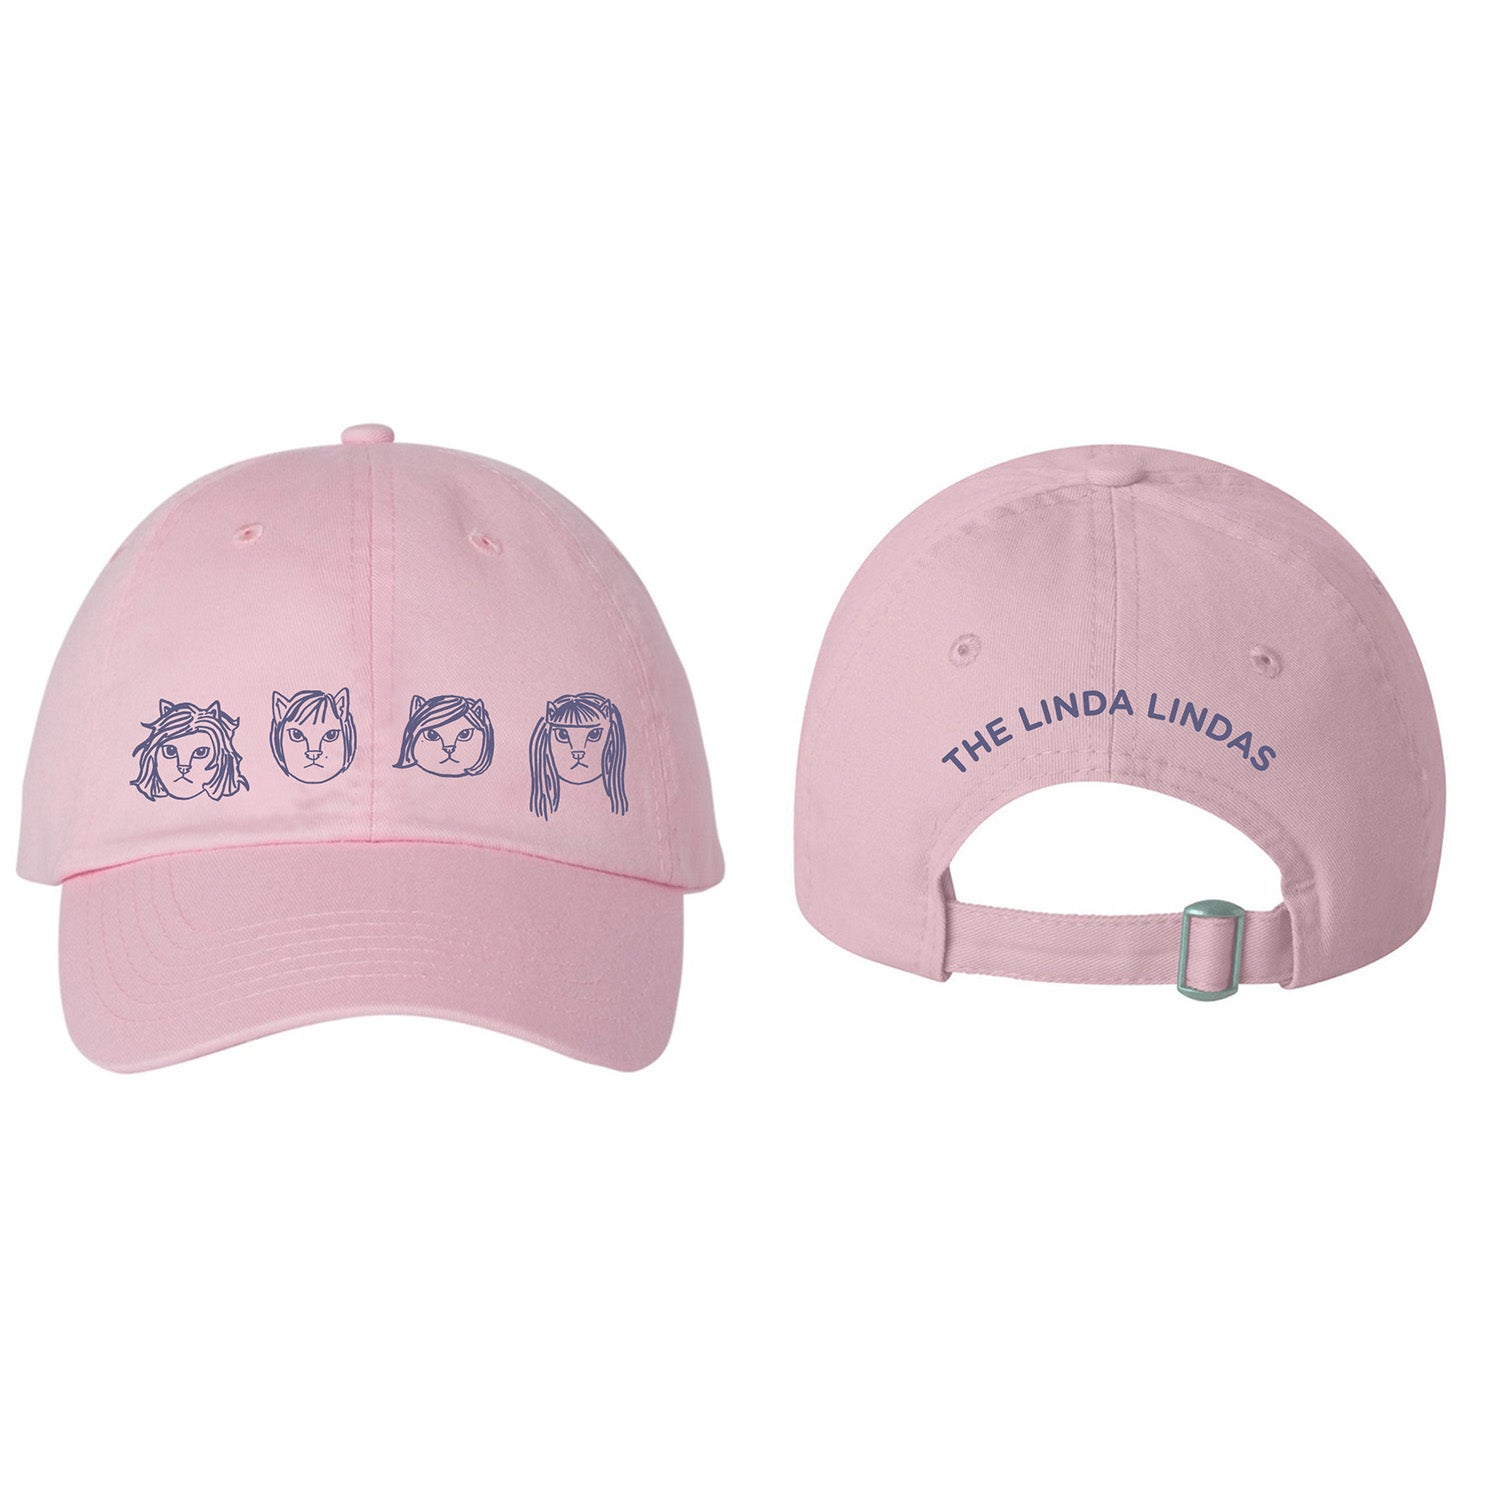 front and back image of a pink dad hat on a white background. front of the hat is on the left and has the linda linda members as cats embroidered in purple across the front. the back of the dad hat is on the right and has purple embroidery that says the linda lindas